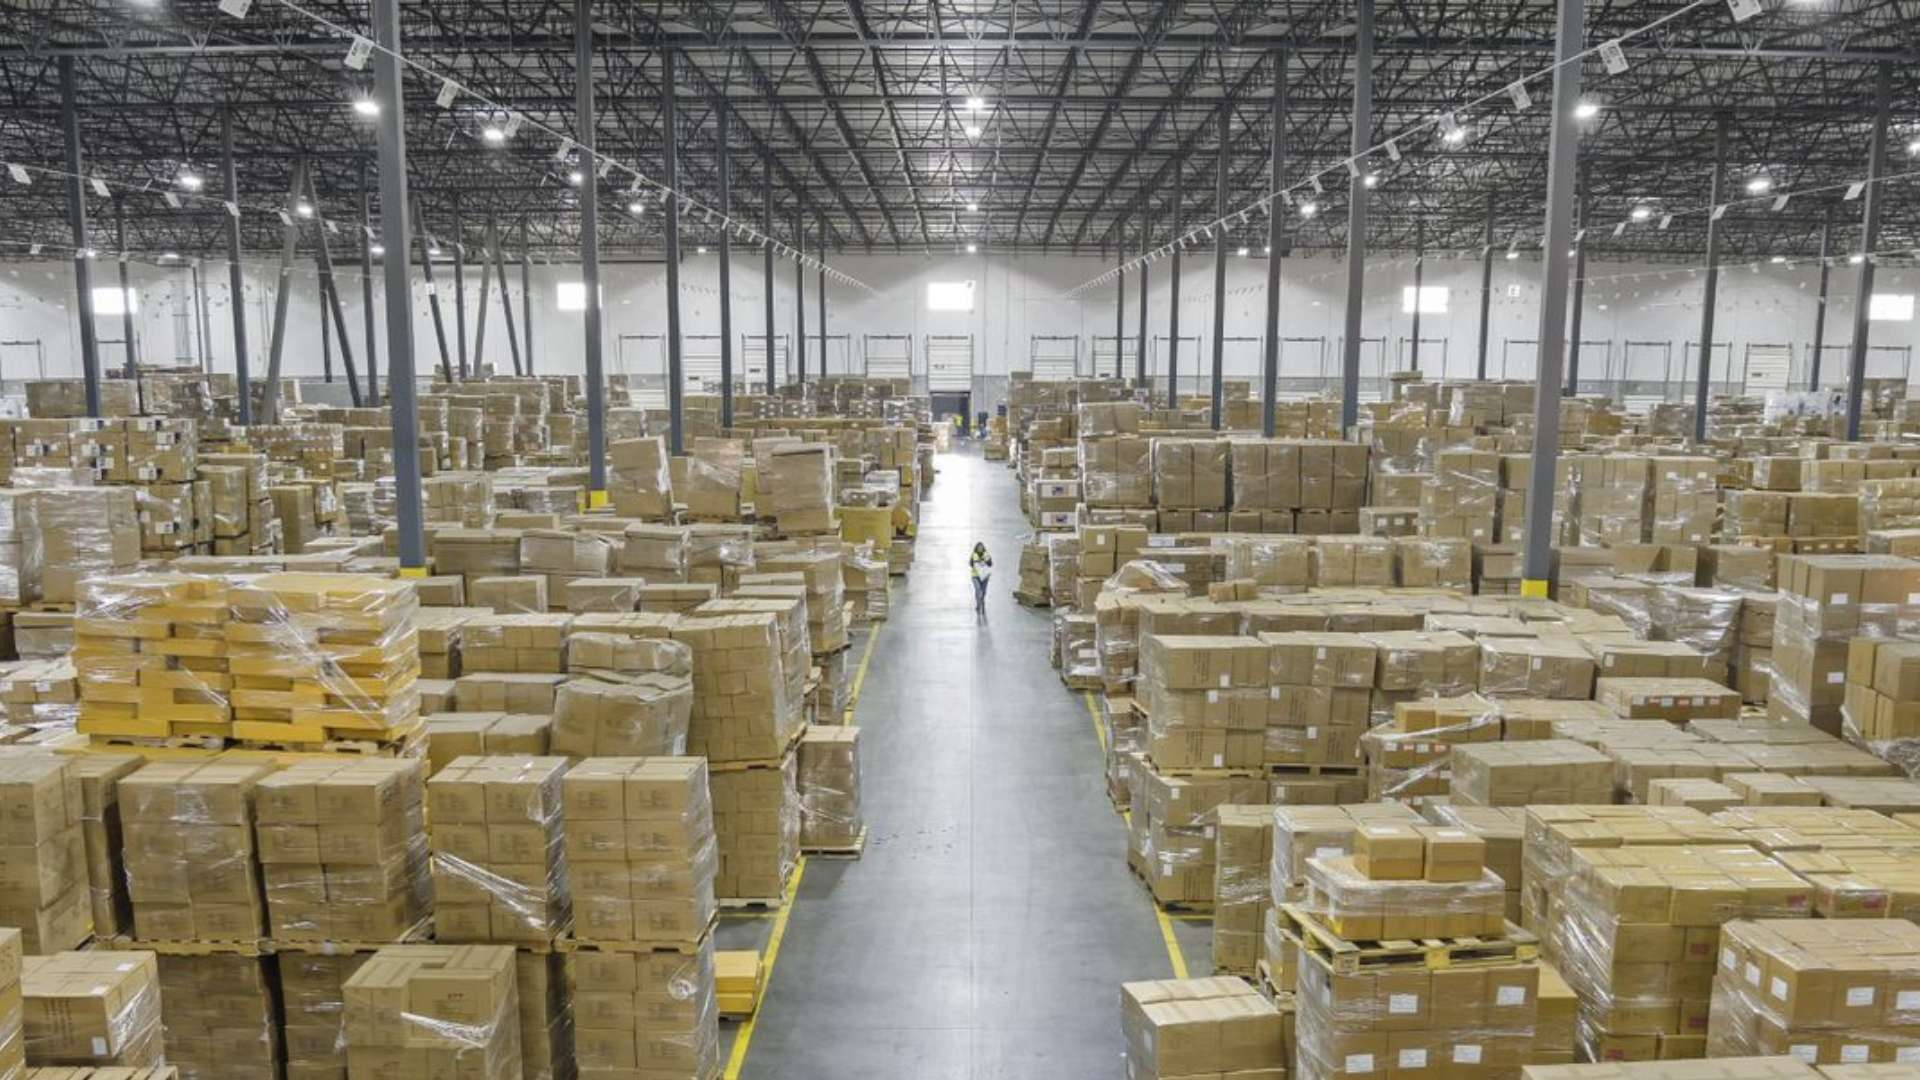 5 Benefits of Outsourcing Your Distribution to a 3PL.